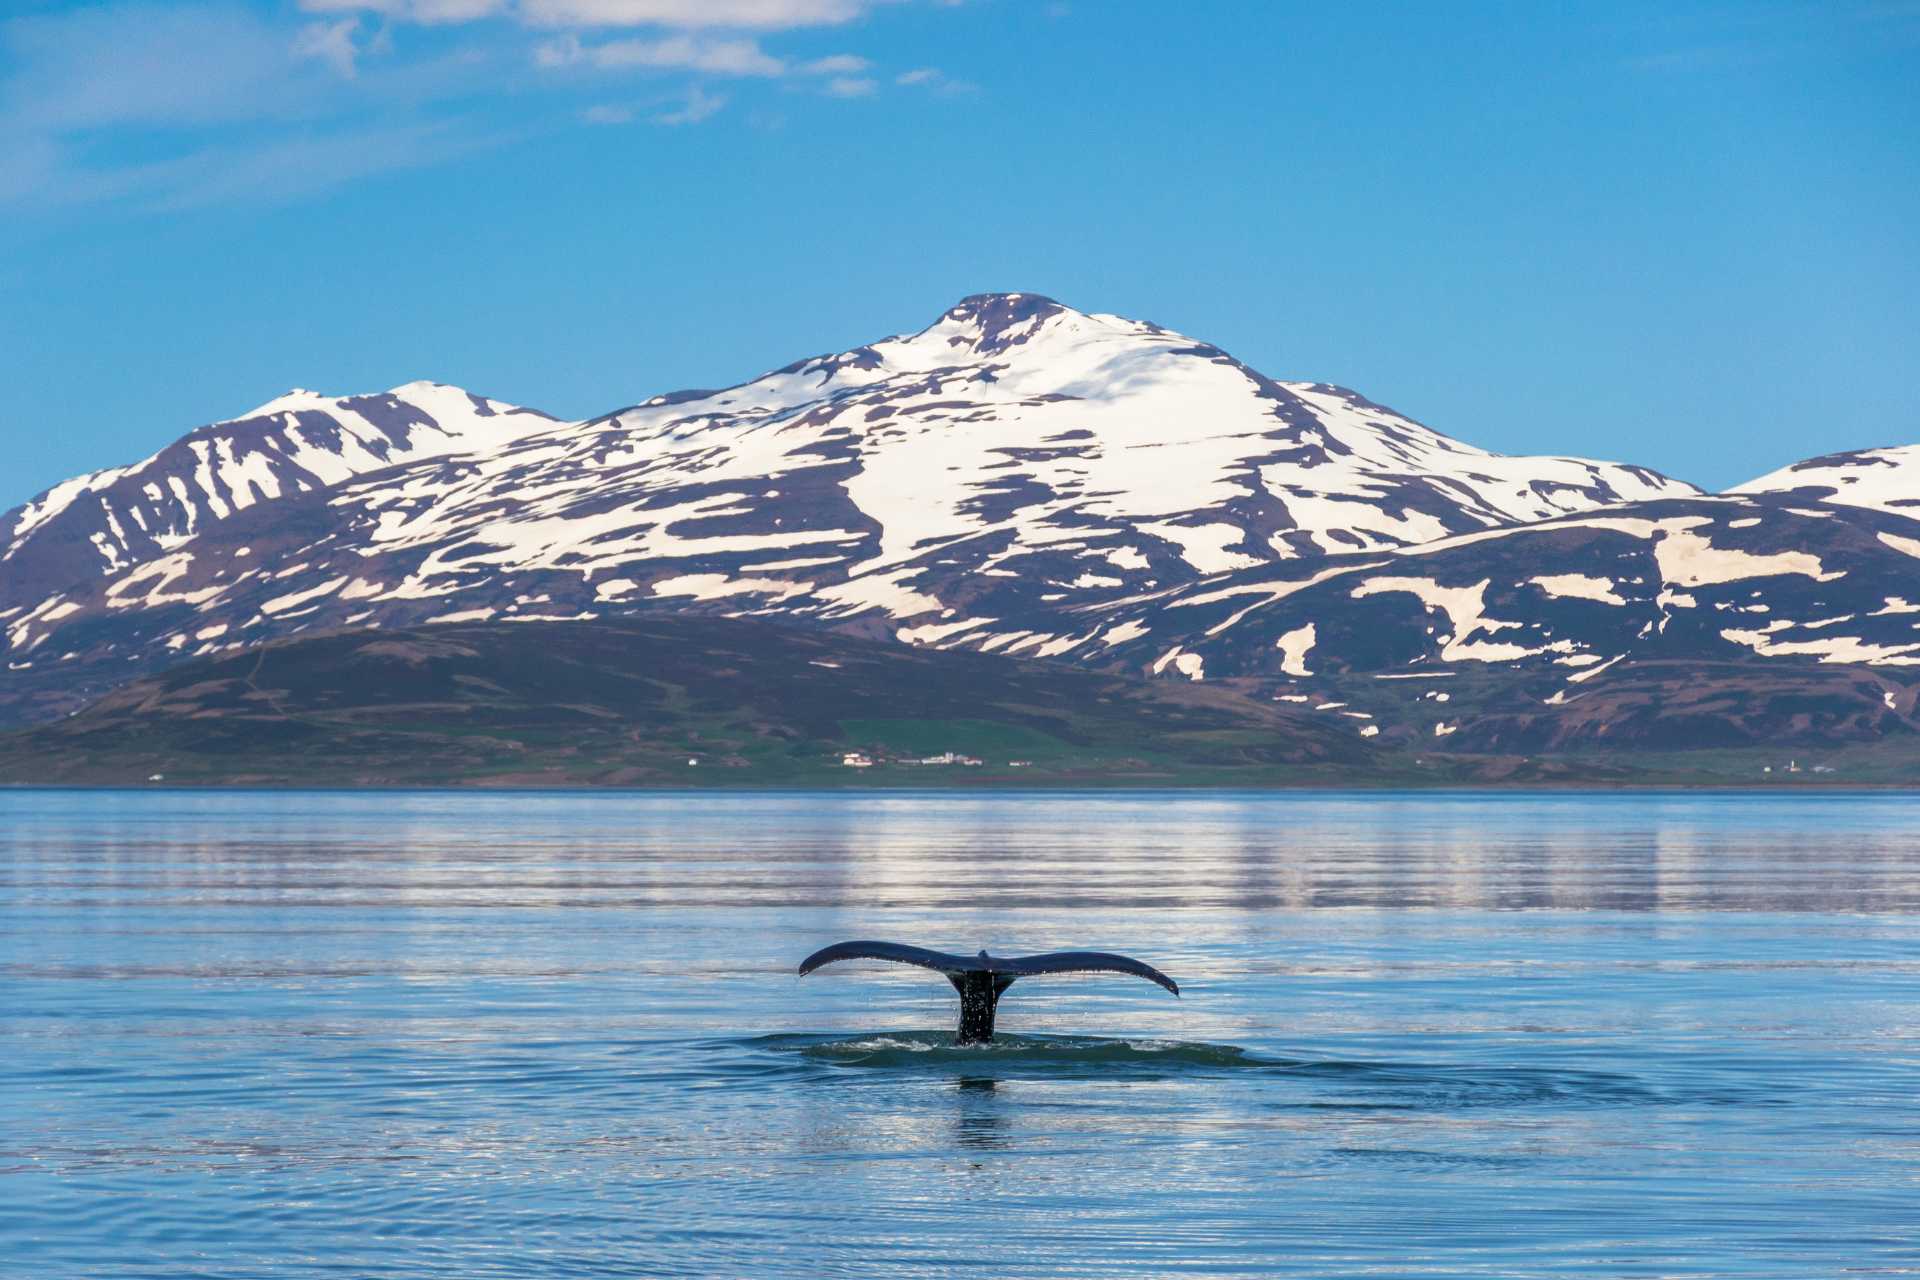 Whale tail submerging in the Eyjafjordur Fjord ©Getty Images